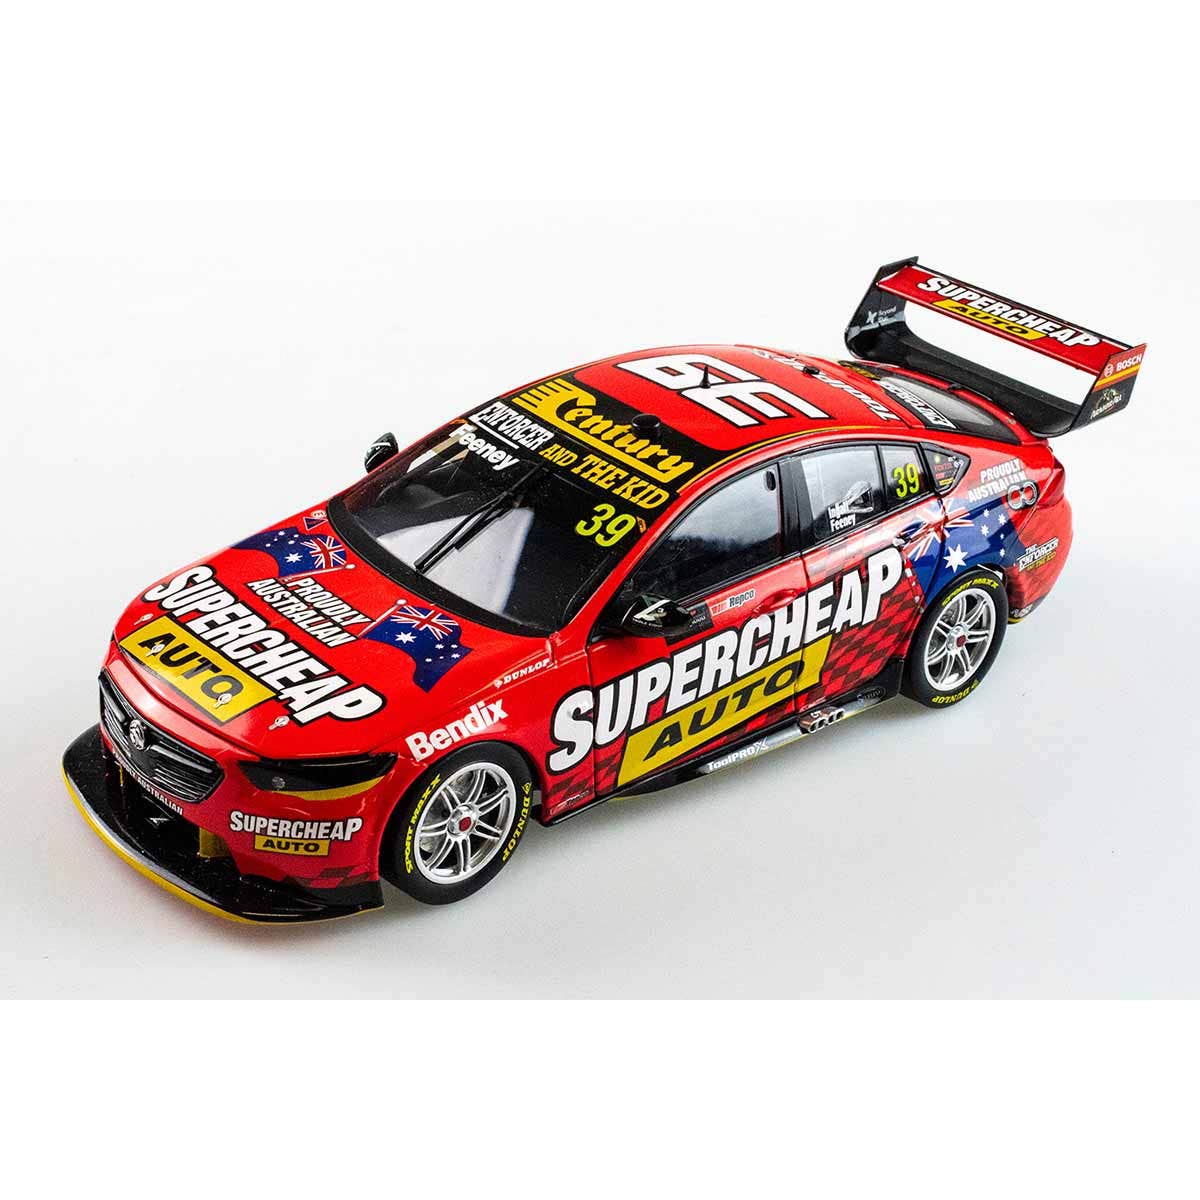 HOLDEN ZB COMMODORE - TRIPLE EIGHT RACE ENGINEERING SUPERCHEAP AUTO - FEENEY/INGALL #39 - REPCO Bathurst 1000 WILDCARD - 1:43 Scale Diecast Model Car